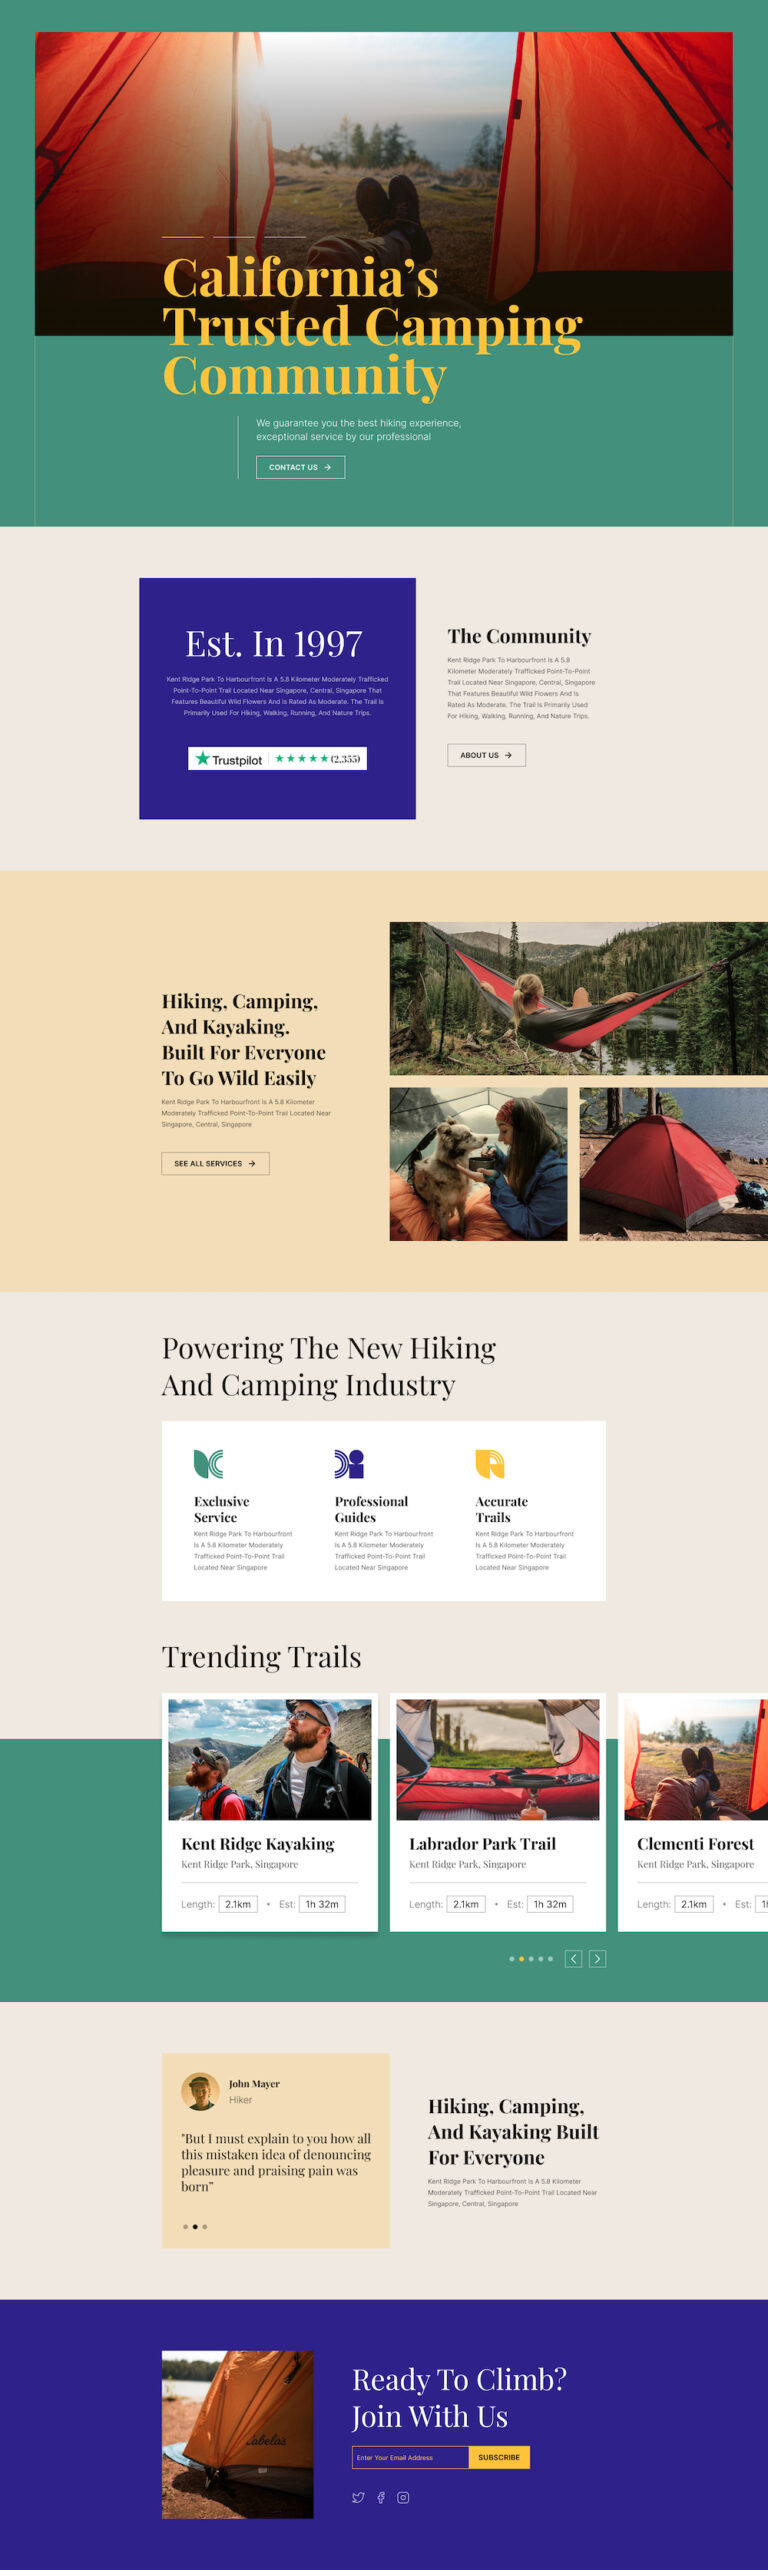 introducing-hiking-camping-a-free-layout-bundle-for-sp-page-builder-pro